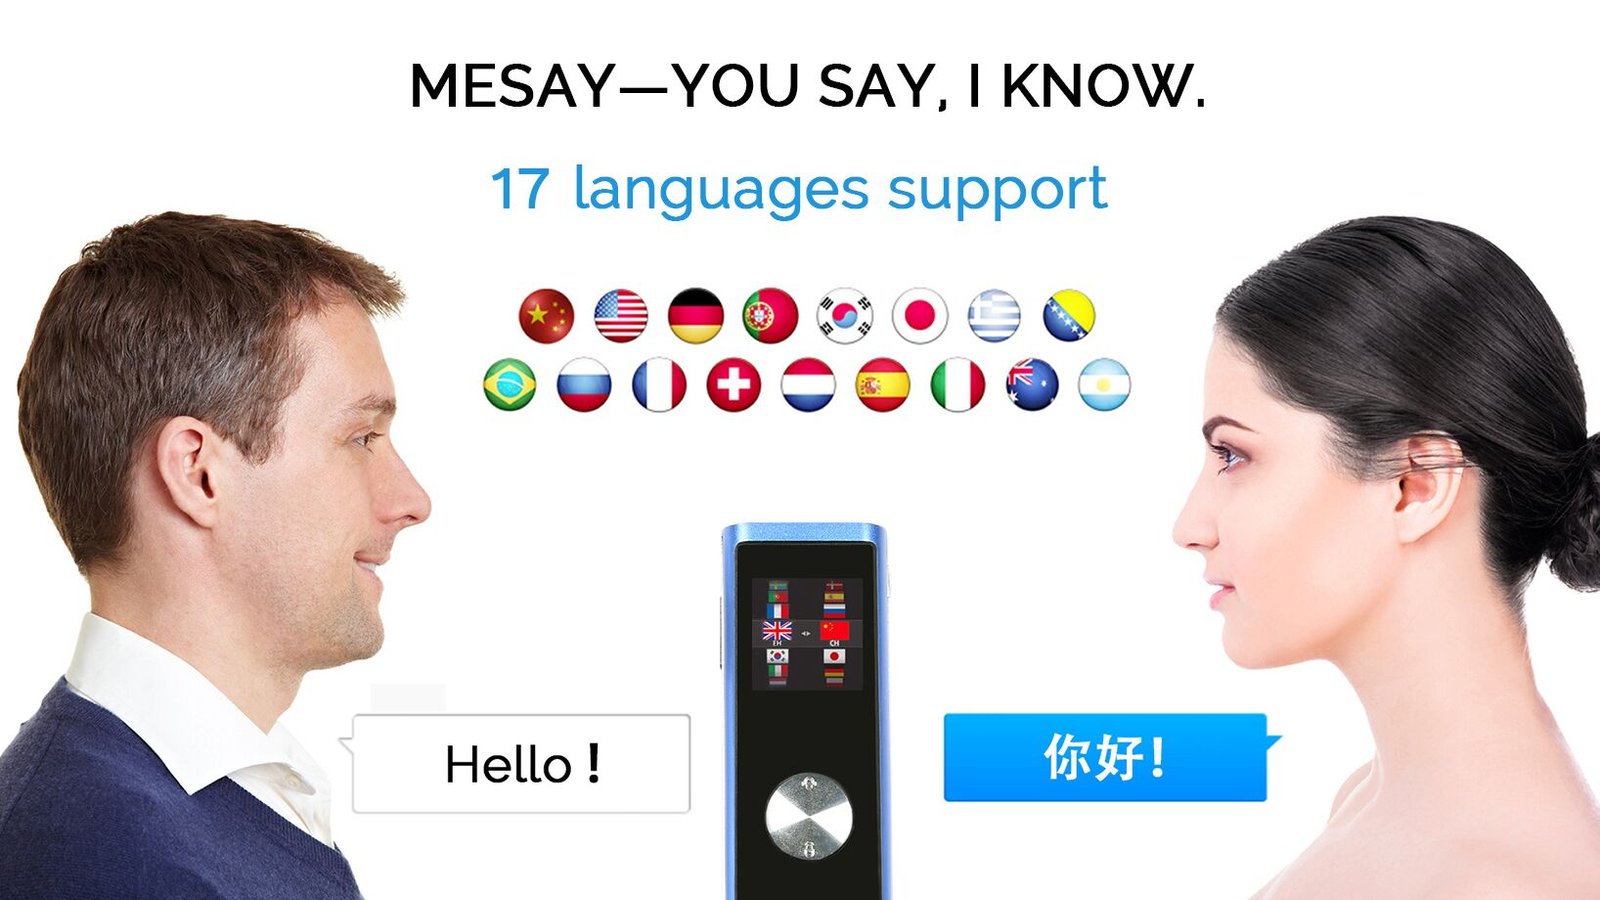 Mesay, The Translation Device That Helps People Scale Globally Launches On Kickstarter